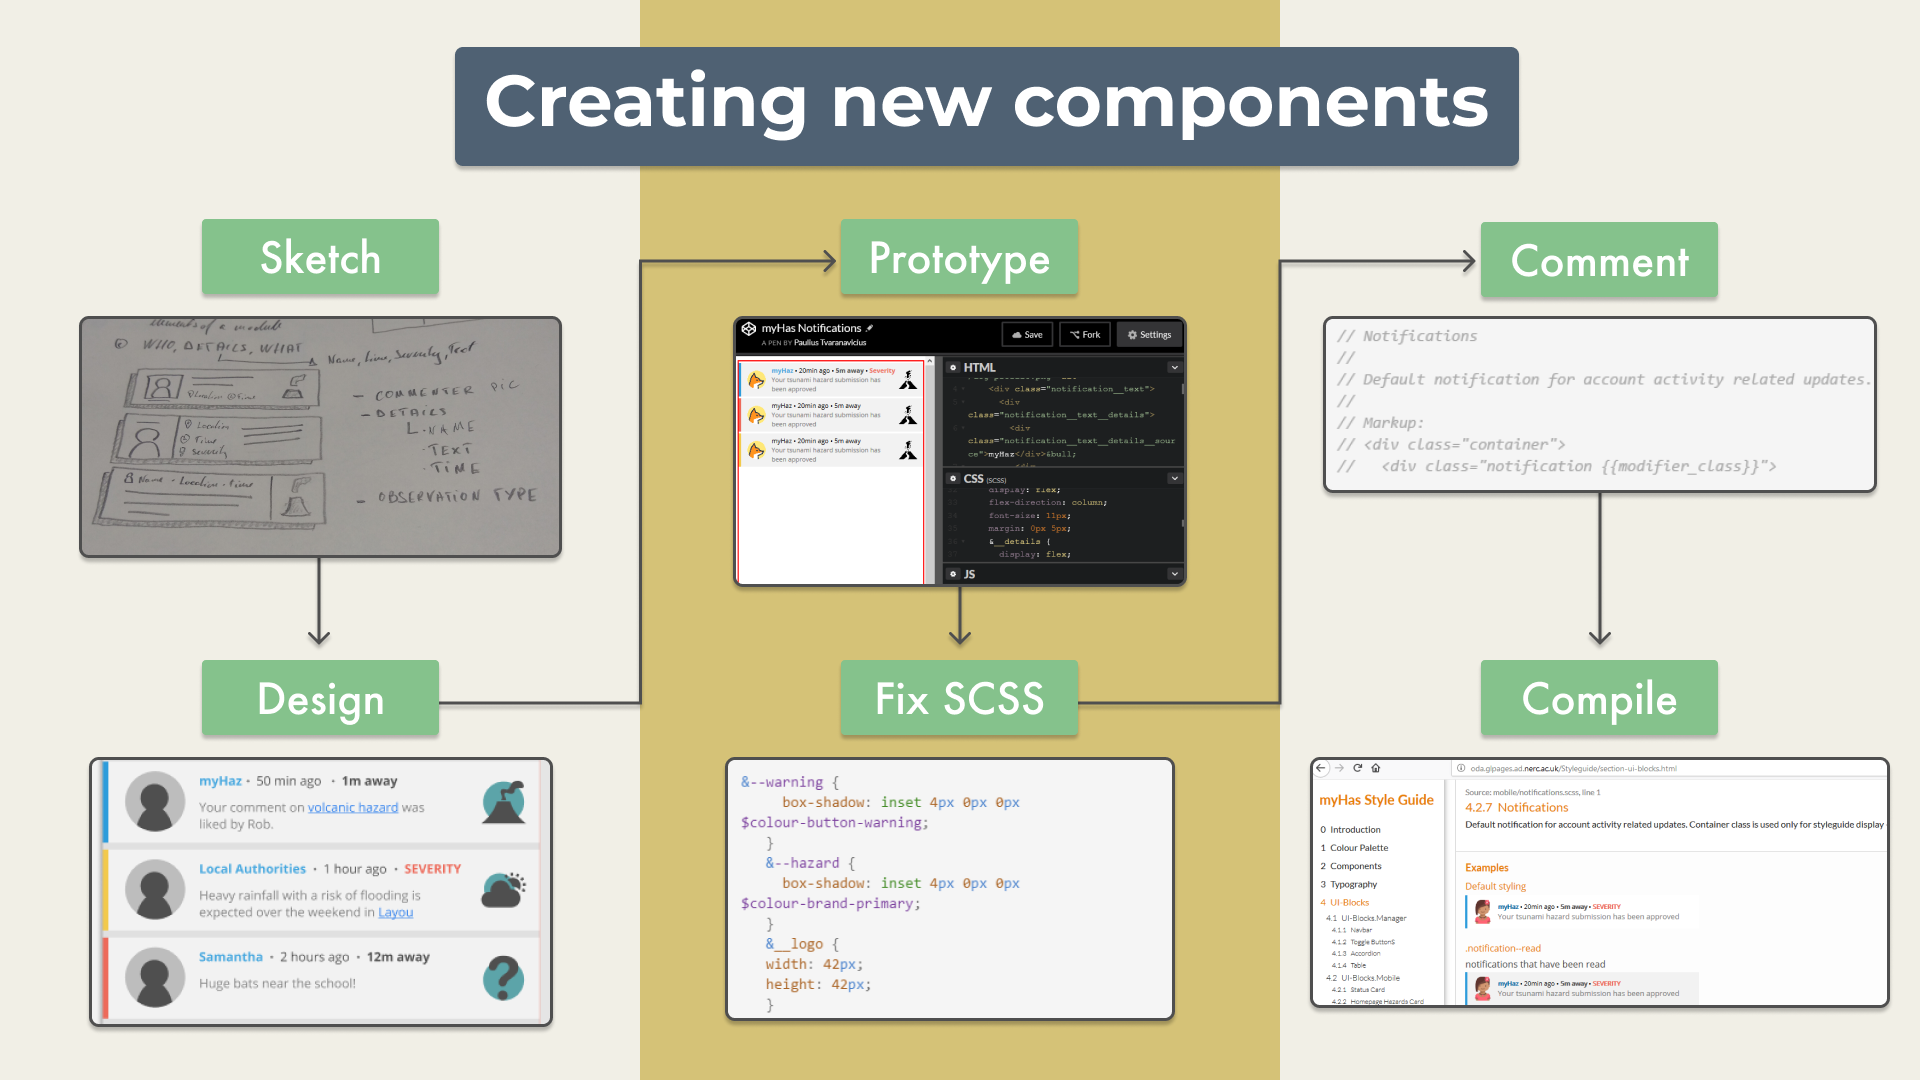 The process for creating new components